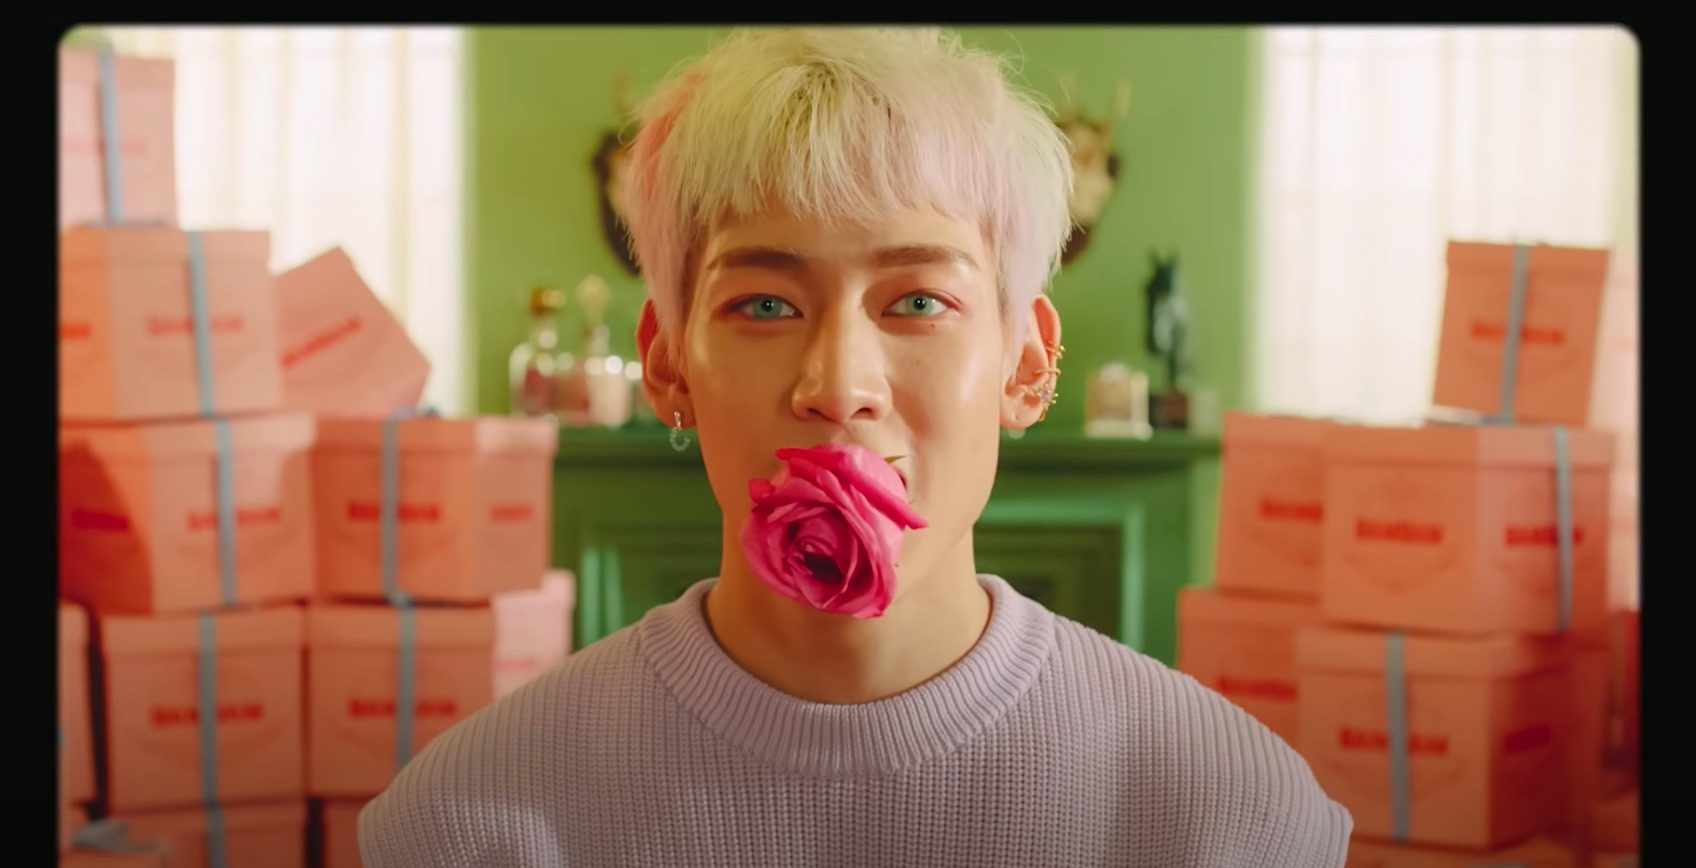 WATCH: BamBam lives in pastel-hued wonderland in ‘riBBon’ music video